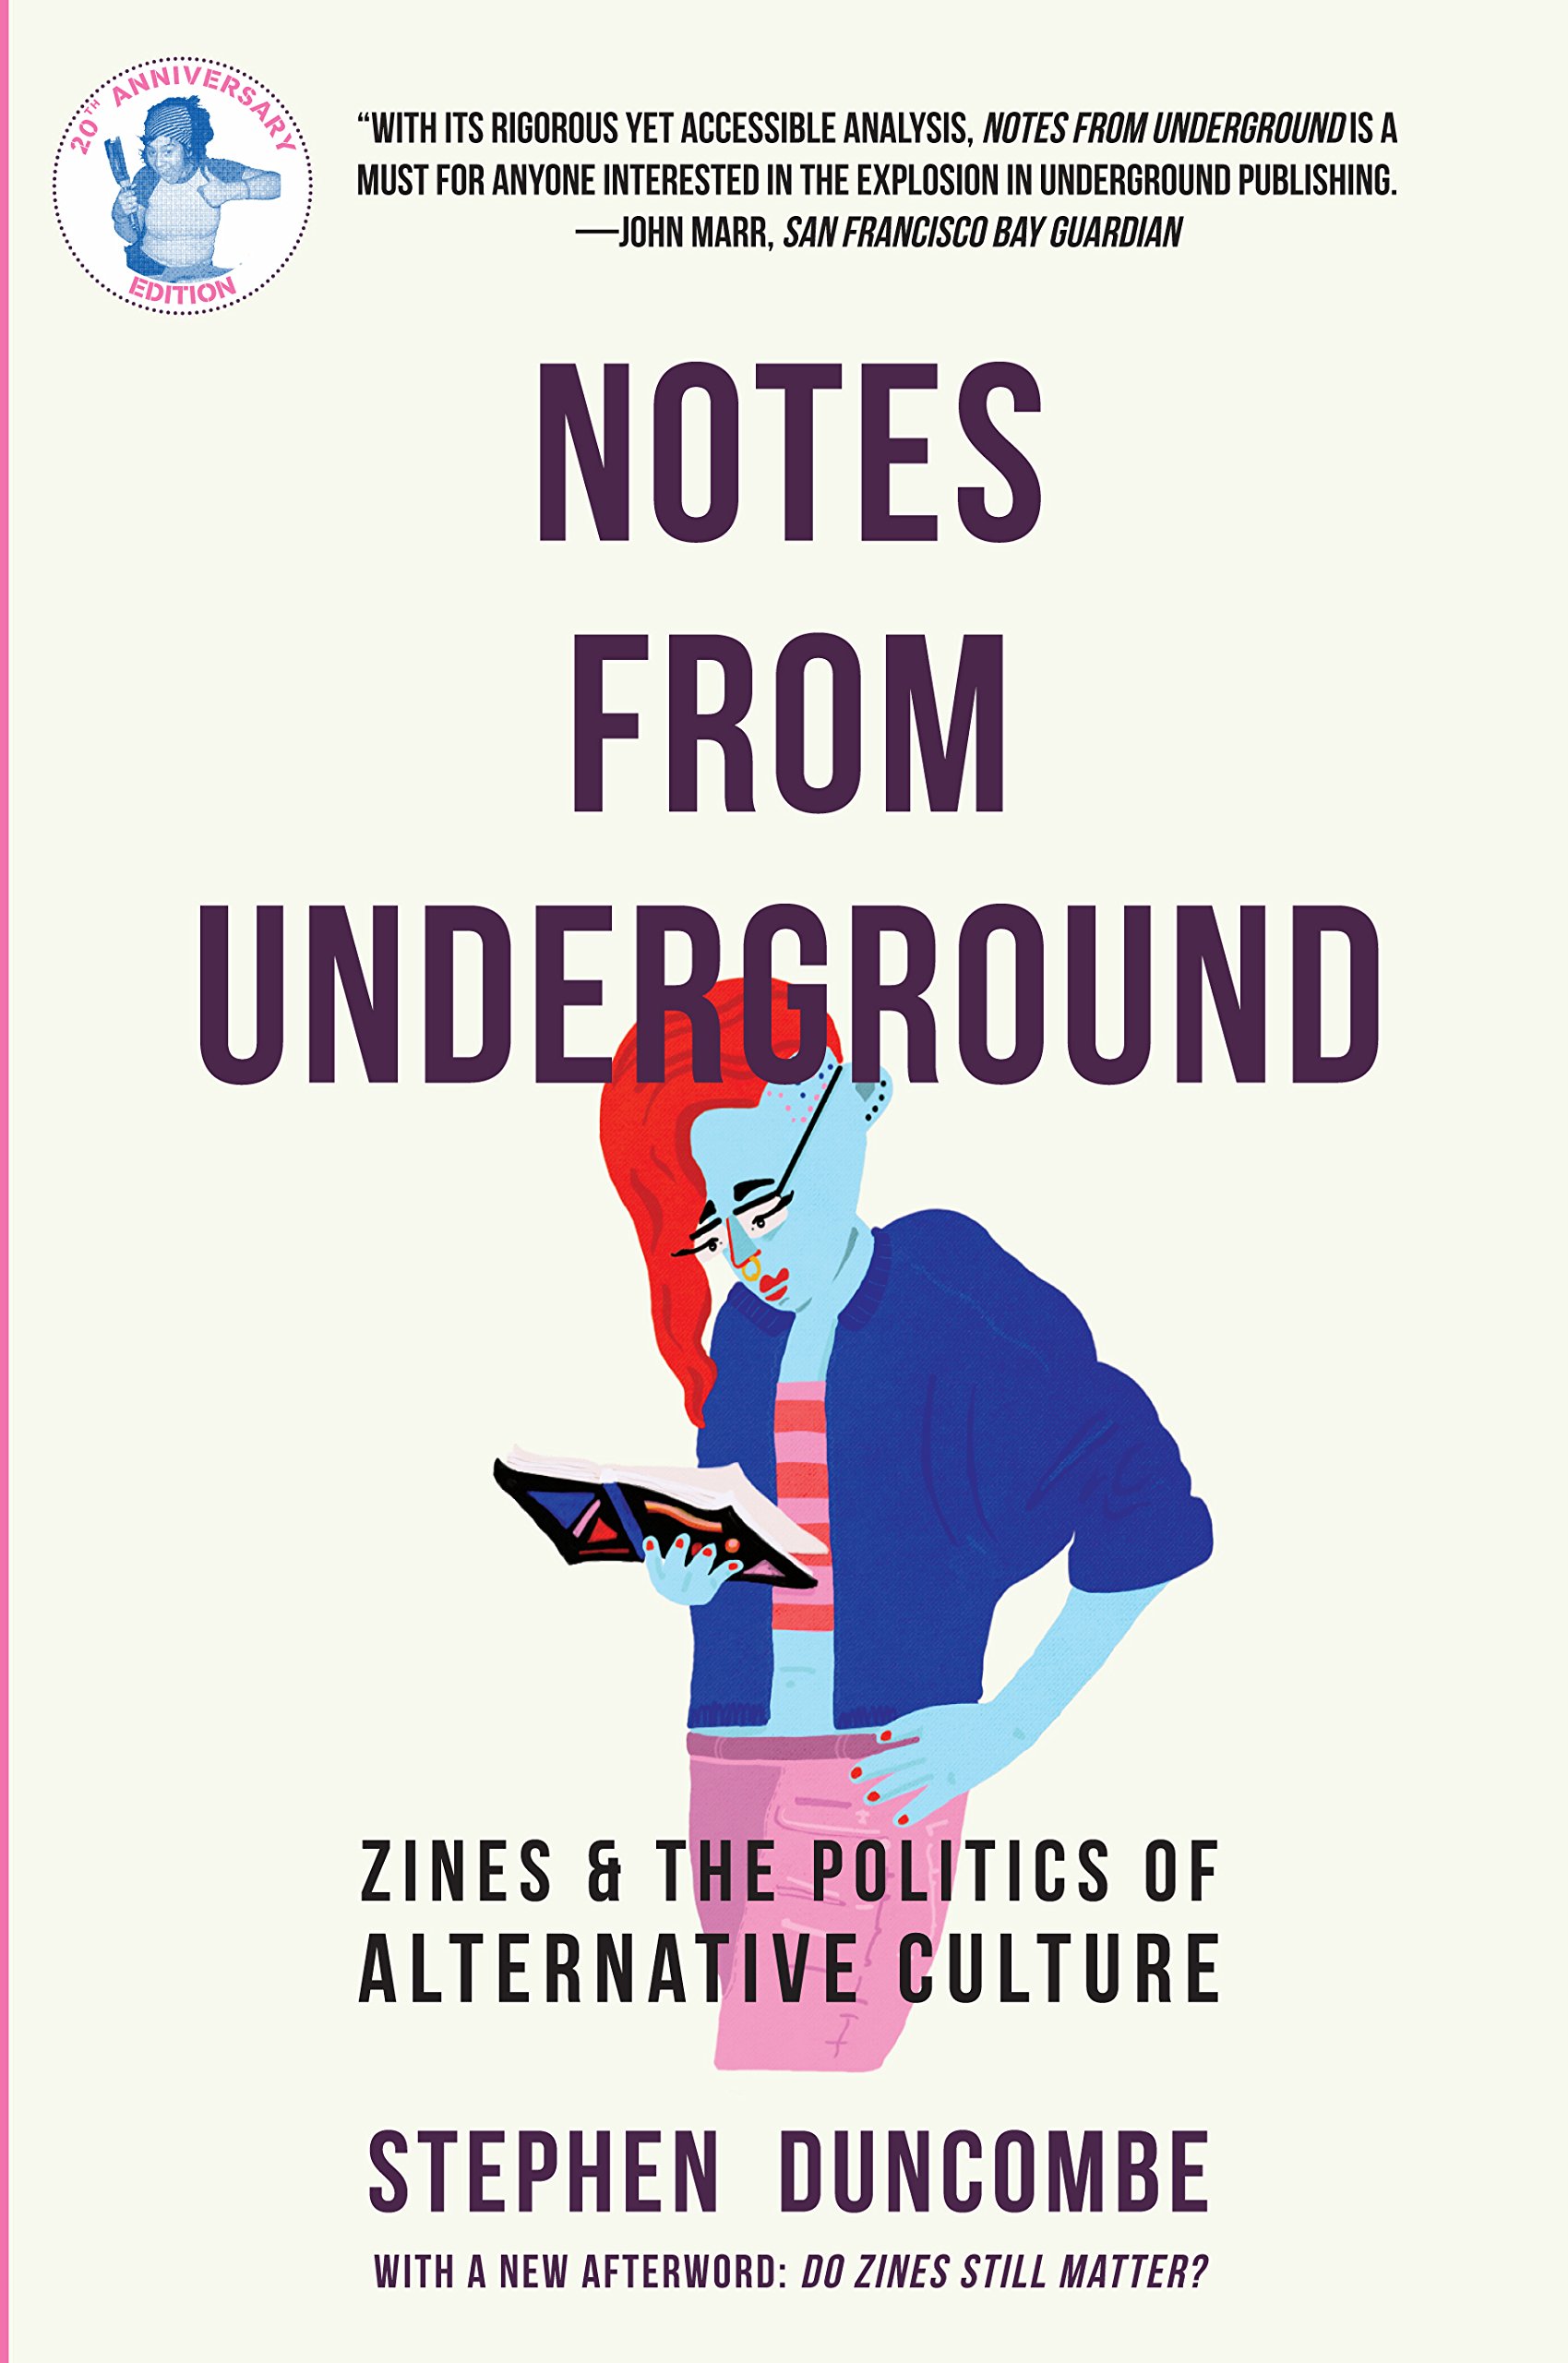 Stephen Duncombe: Notes from Underground (2017, Verso Books, Microcosm Publishing)